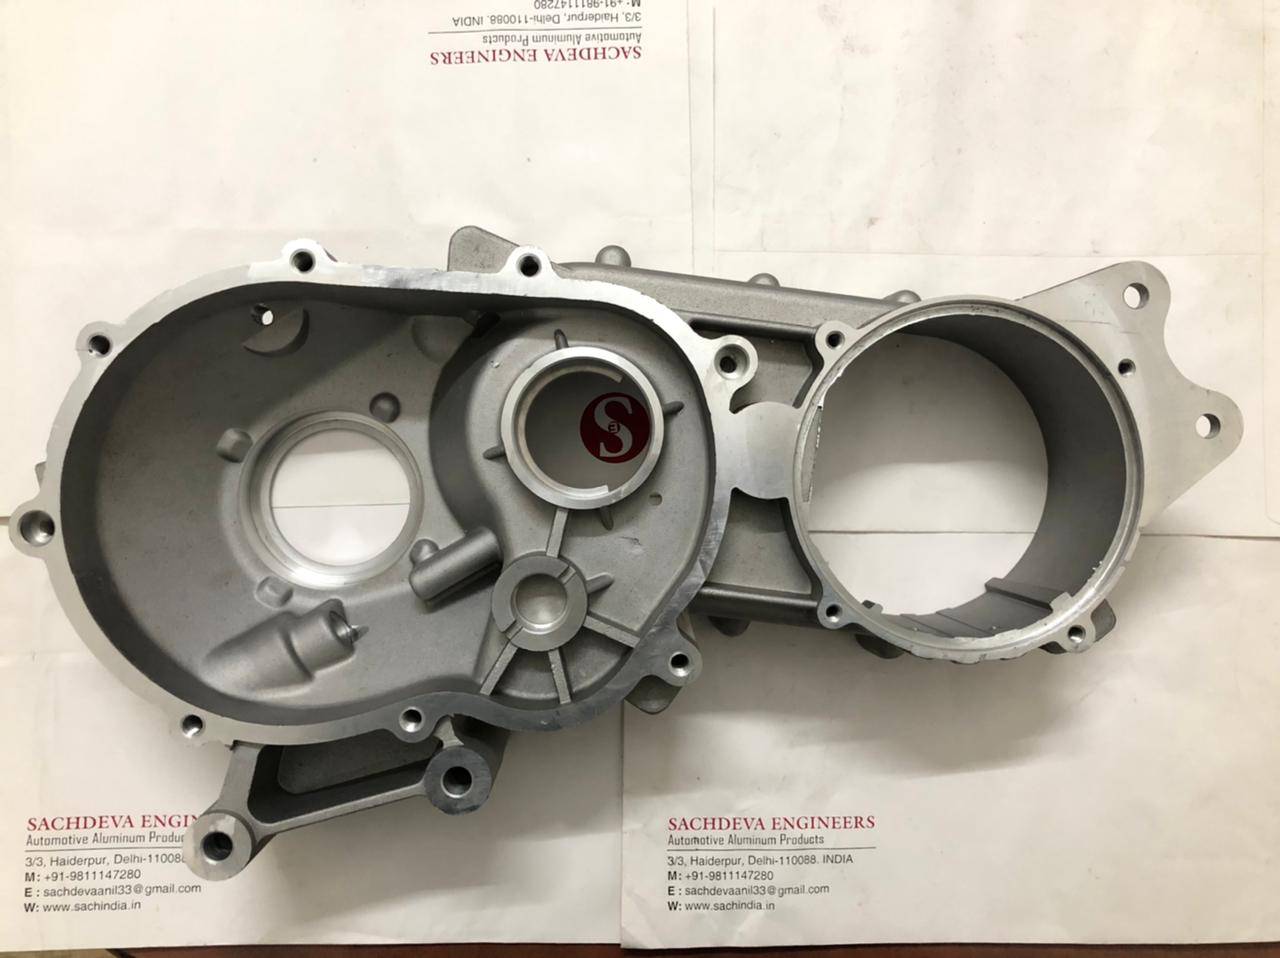 Gearbox Main housing for apr piaggio bs3 engine